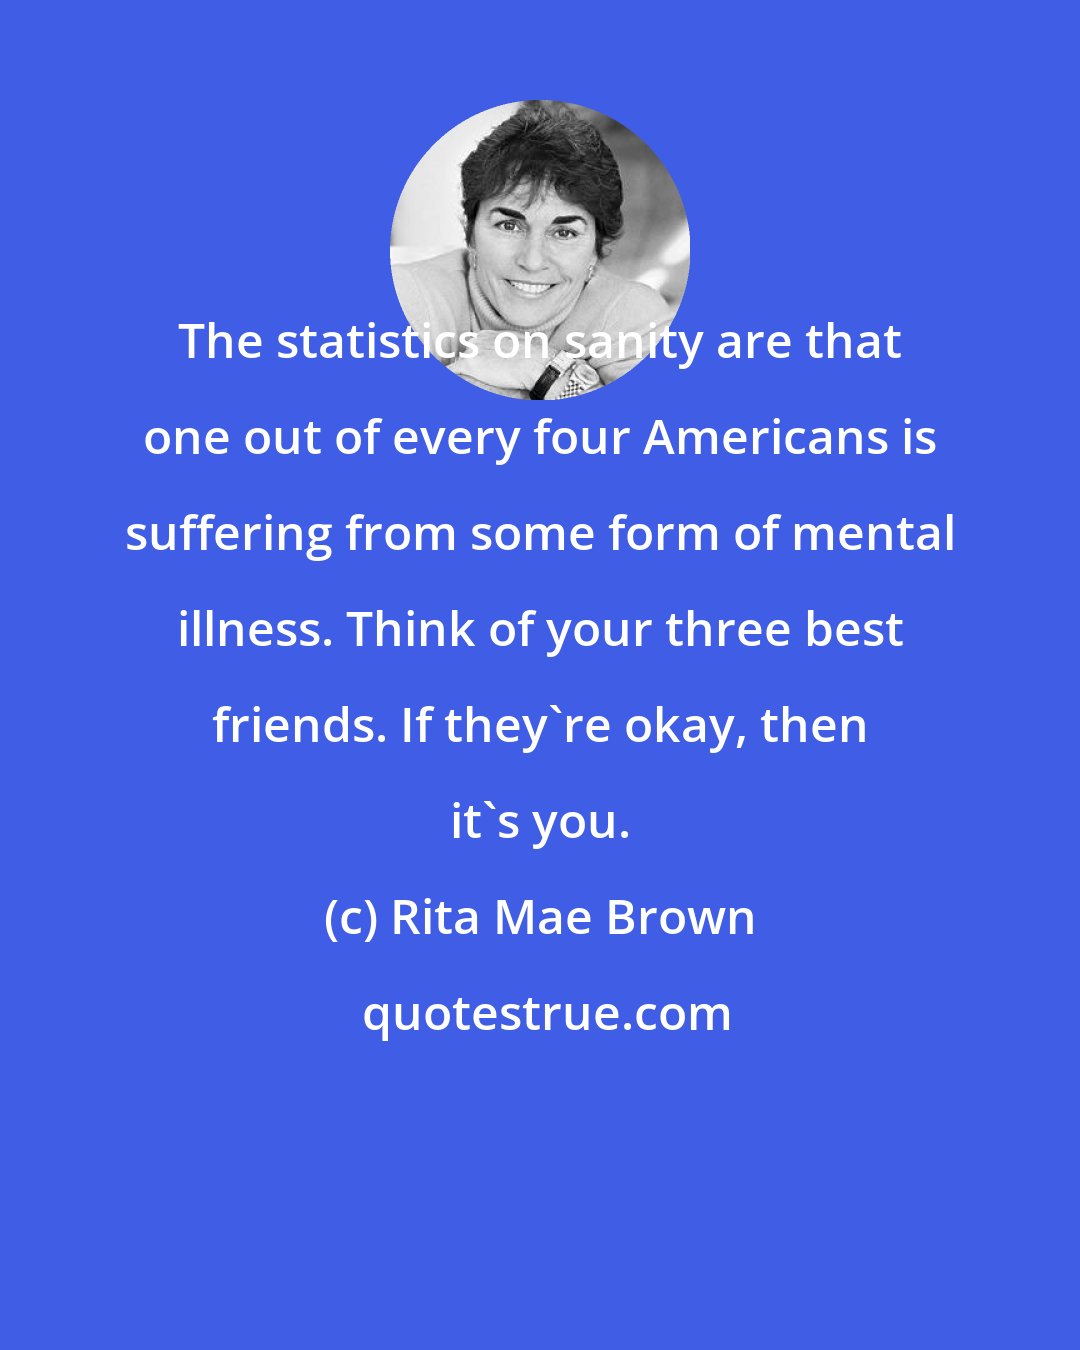 Rita Mae Brown: The statistics on sanity are that one out of every four Americans is suffering from some form of mental illness. Think of your three best friends. If they're okay, then it's you.